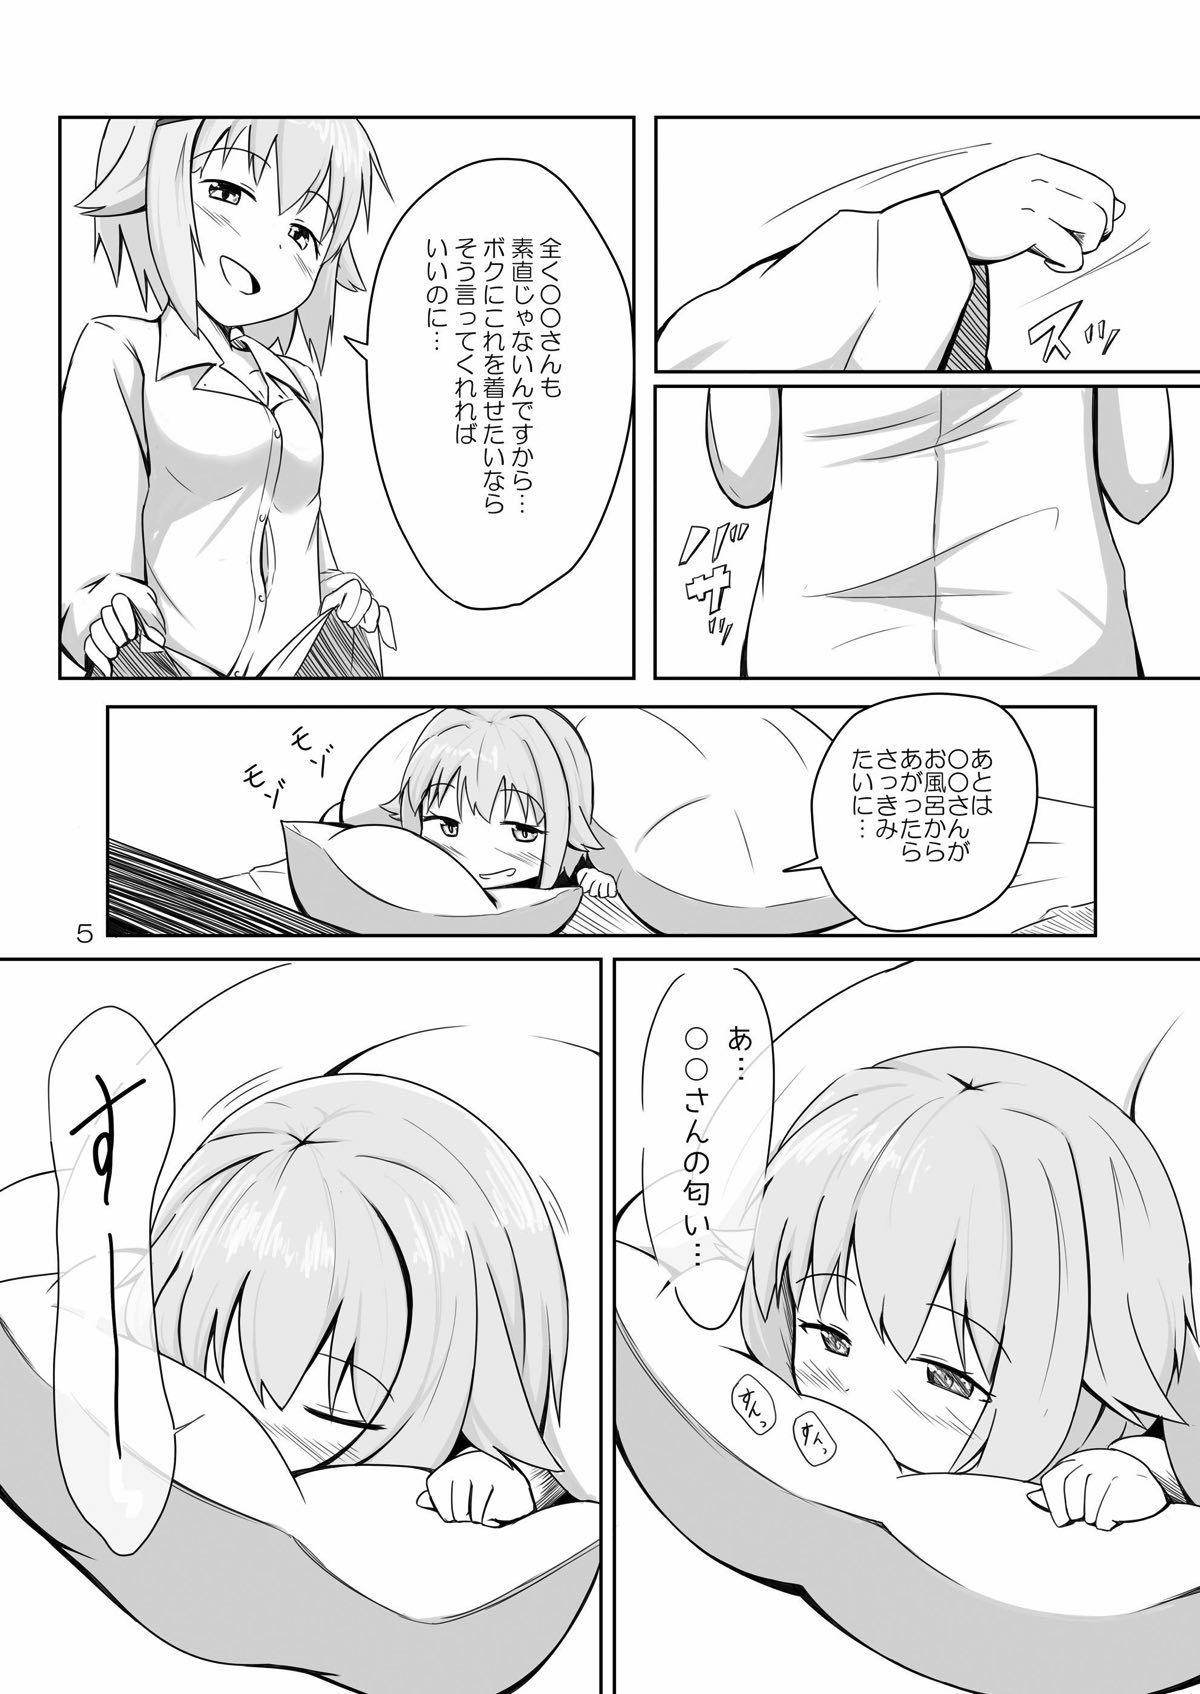 Fisting SACHIKO in my room - The idolmaster Huge - Page 4